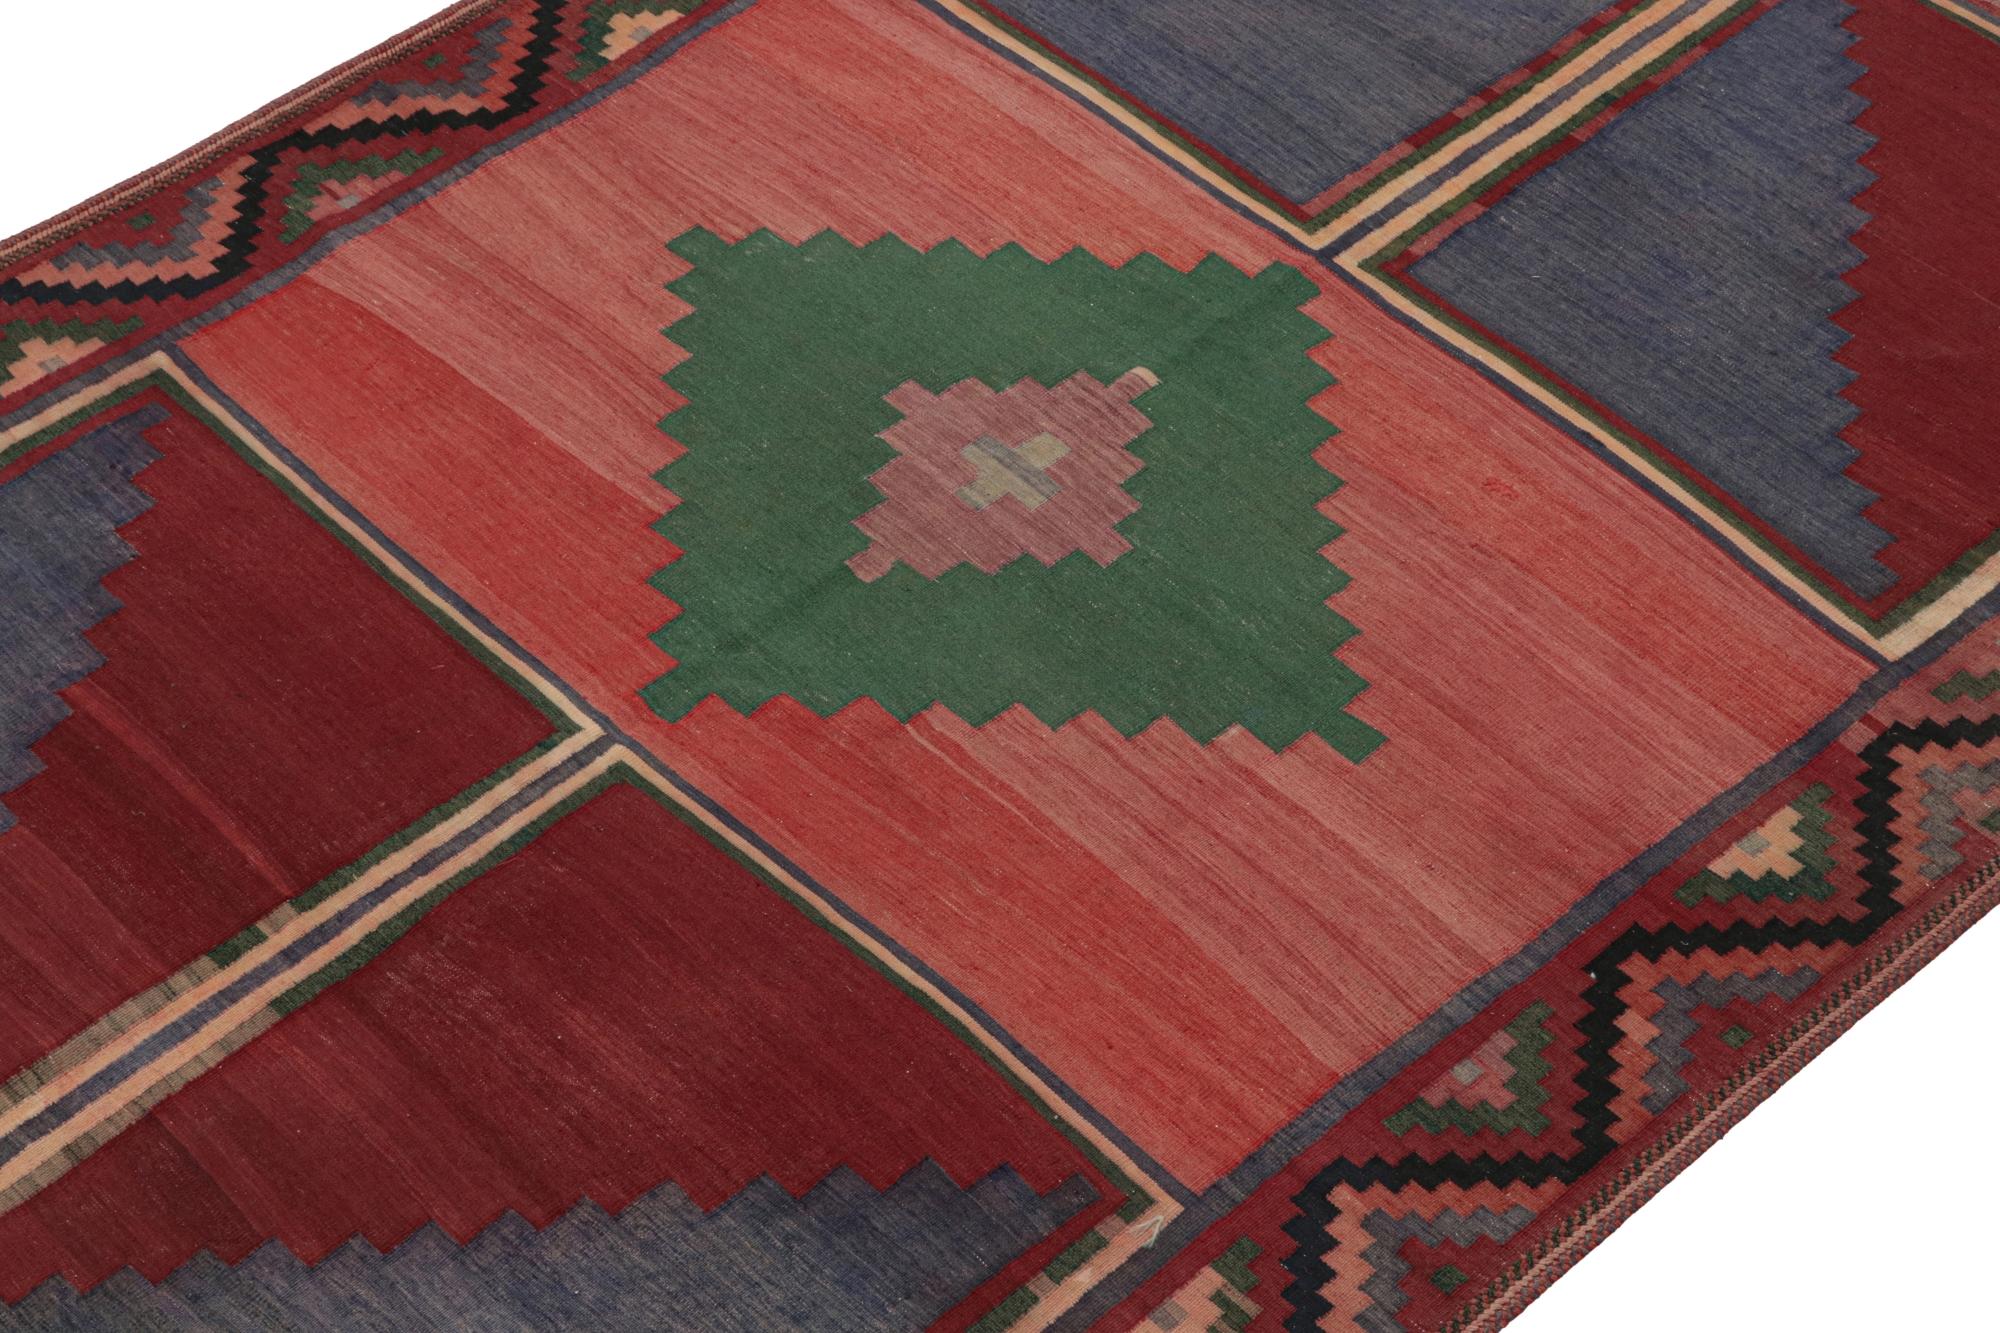 Handwoven in wool, this vintage 5x10 Turkish tribal Kilim of the 1950s is the grand new entry to Rug & Kilim”s repertoire of midcentury flatweaves. 

On the Design: 

The vintage flatweave boasts sharp geometric patterns in red, green & blue